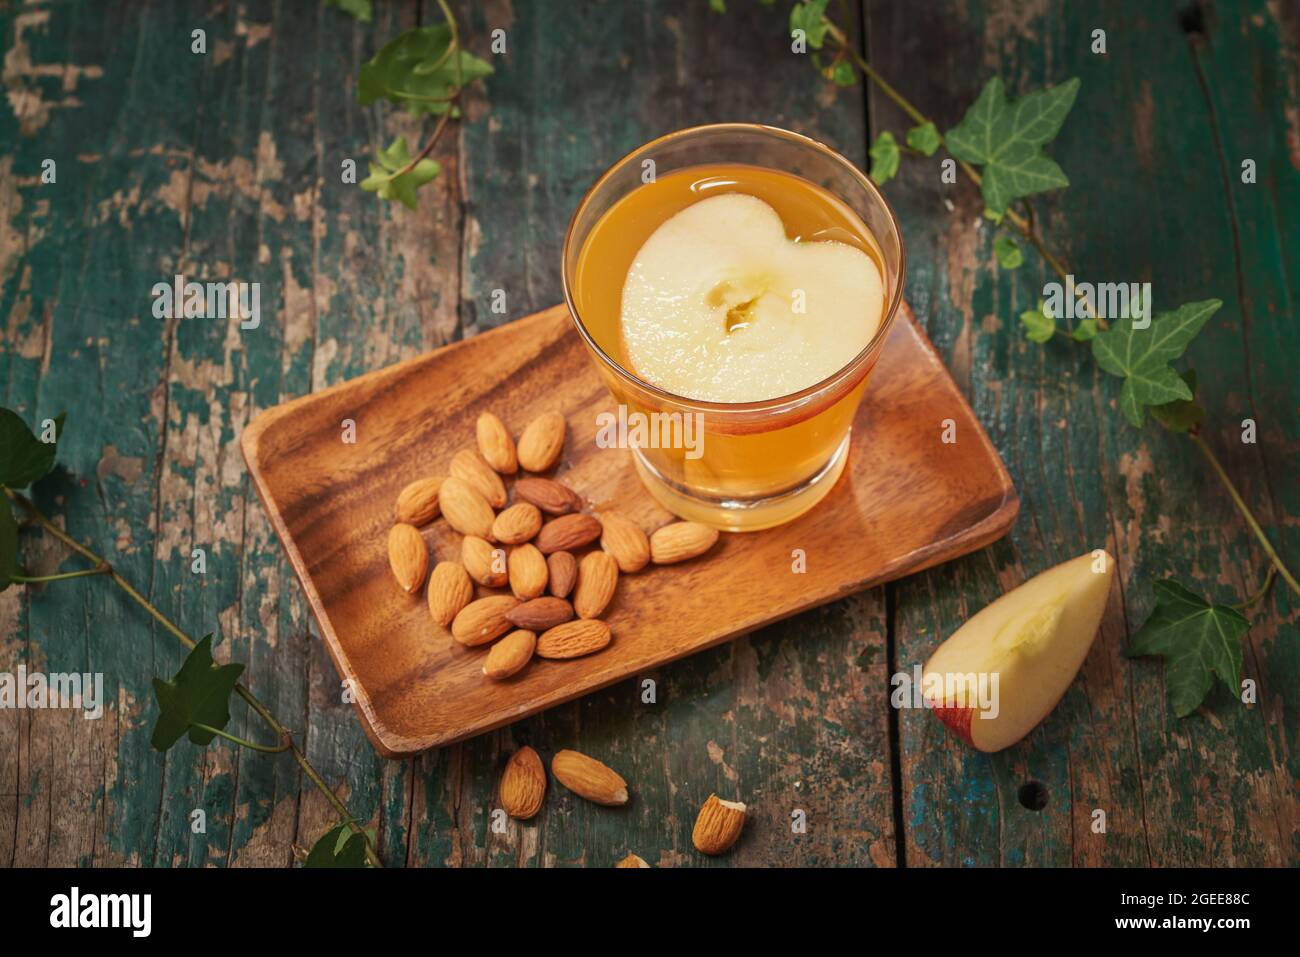 Hot drink of apple tea with cinnamon stick. Hot drink with apples for autumn or winter. Stock Photo